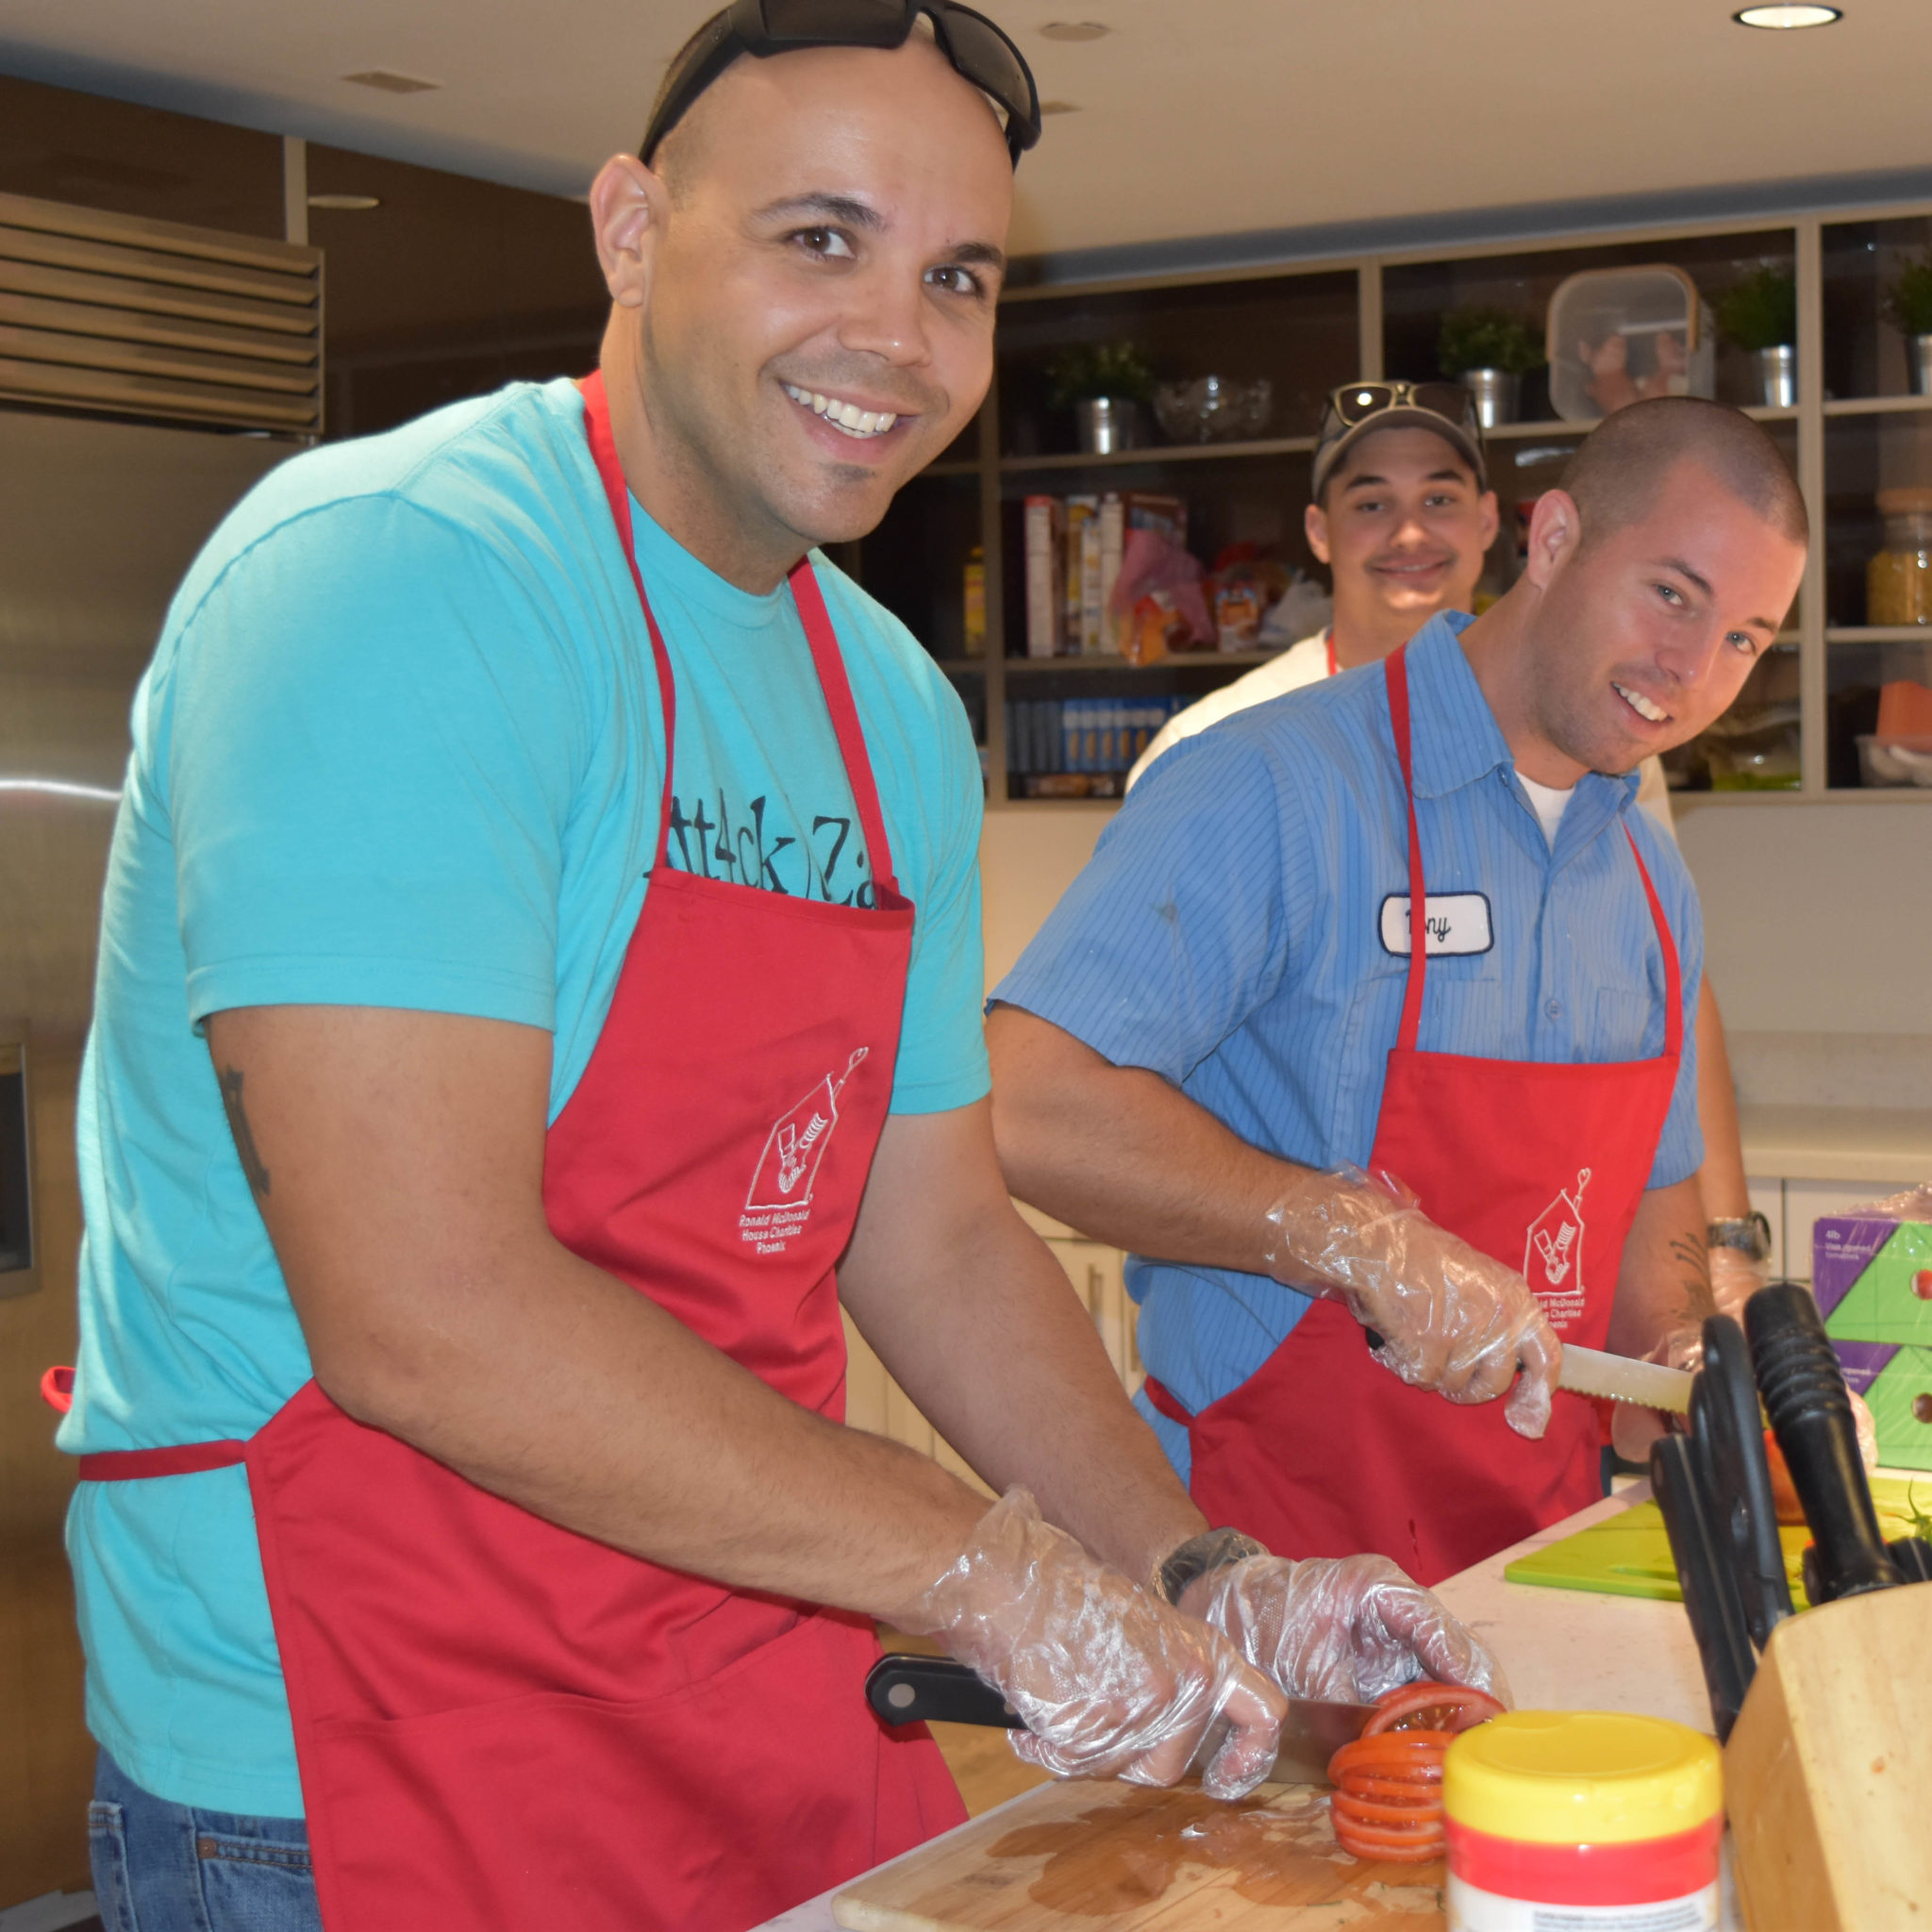 Two men with RMHC aprons cutting up vegetables in the kitchen